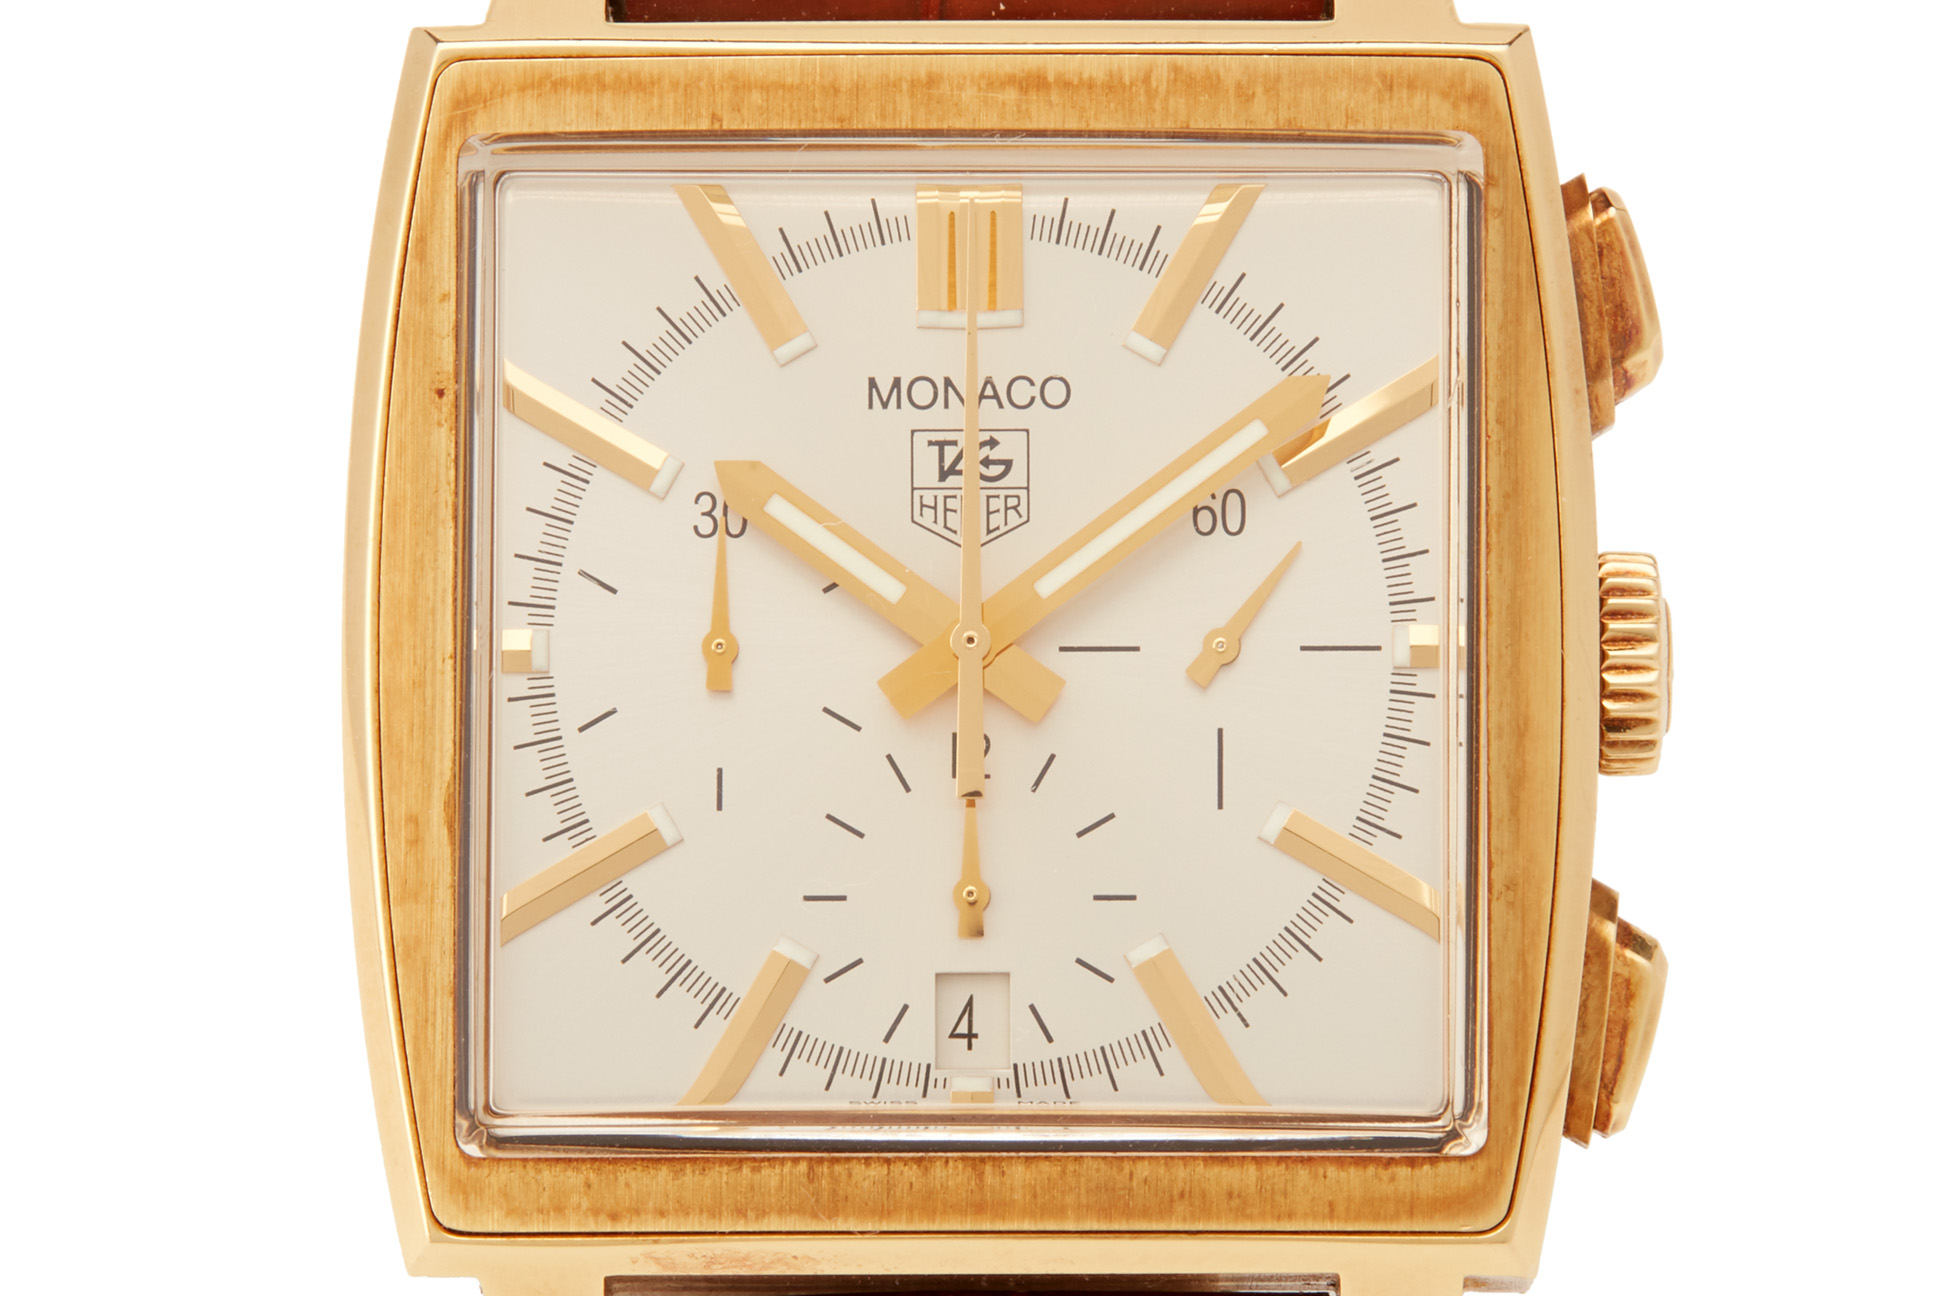 TAG HEUER MONACO GOLD AUTOMATIC CHRONOGRAPH WATCH - Image 2 of 8